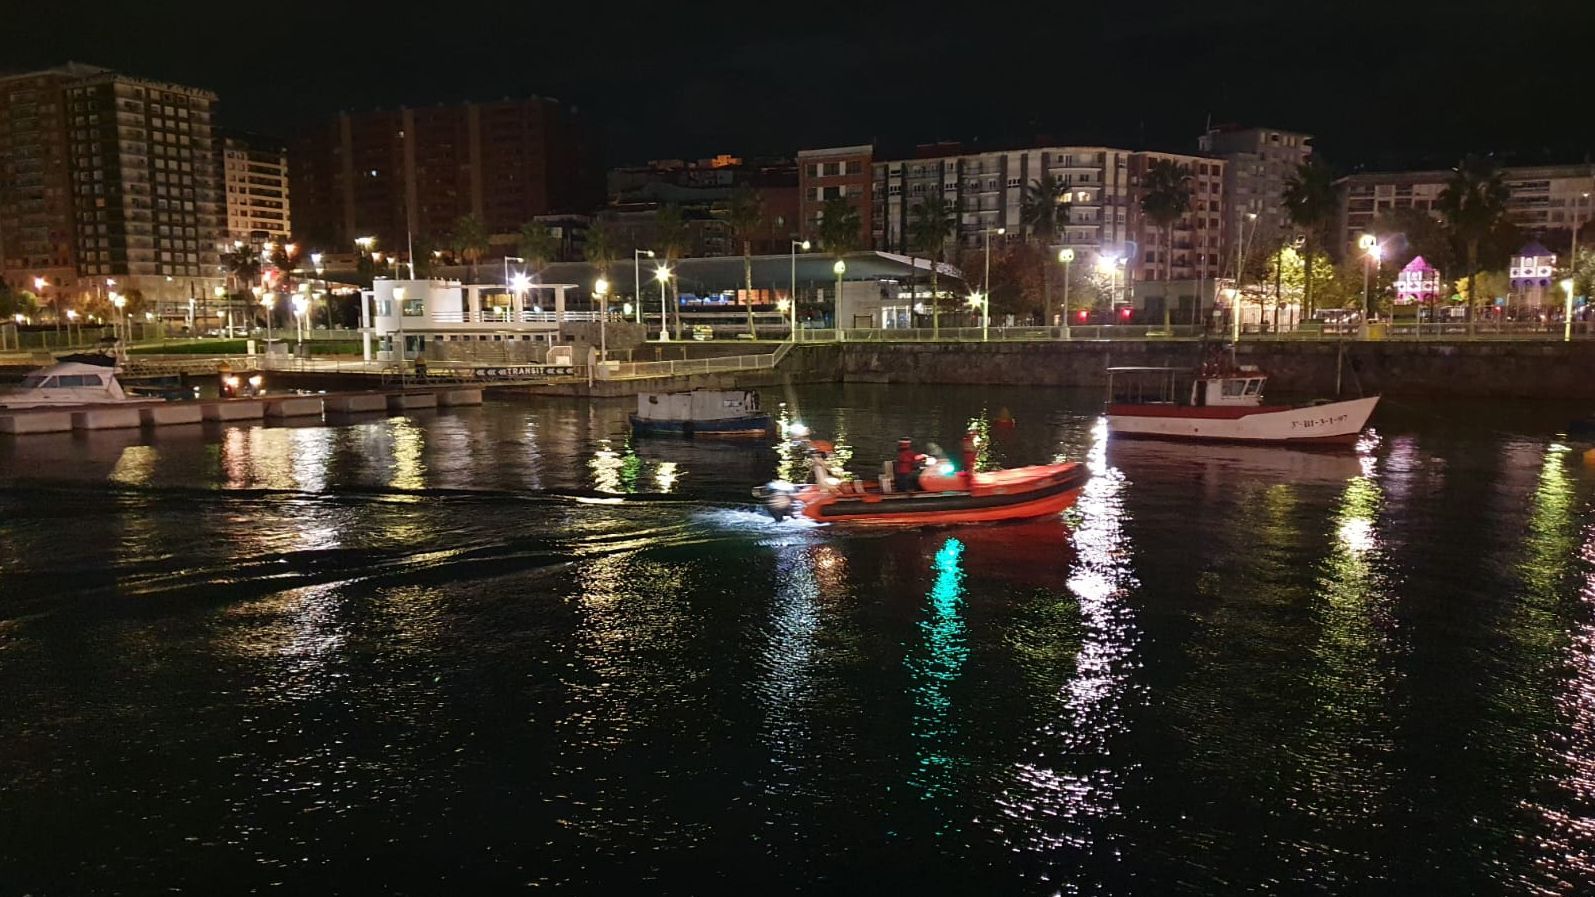 The 82-year-old man who disappeared in Santurtzi is found dead in the Bilbao estuary